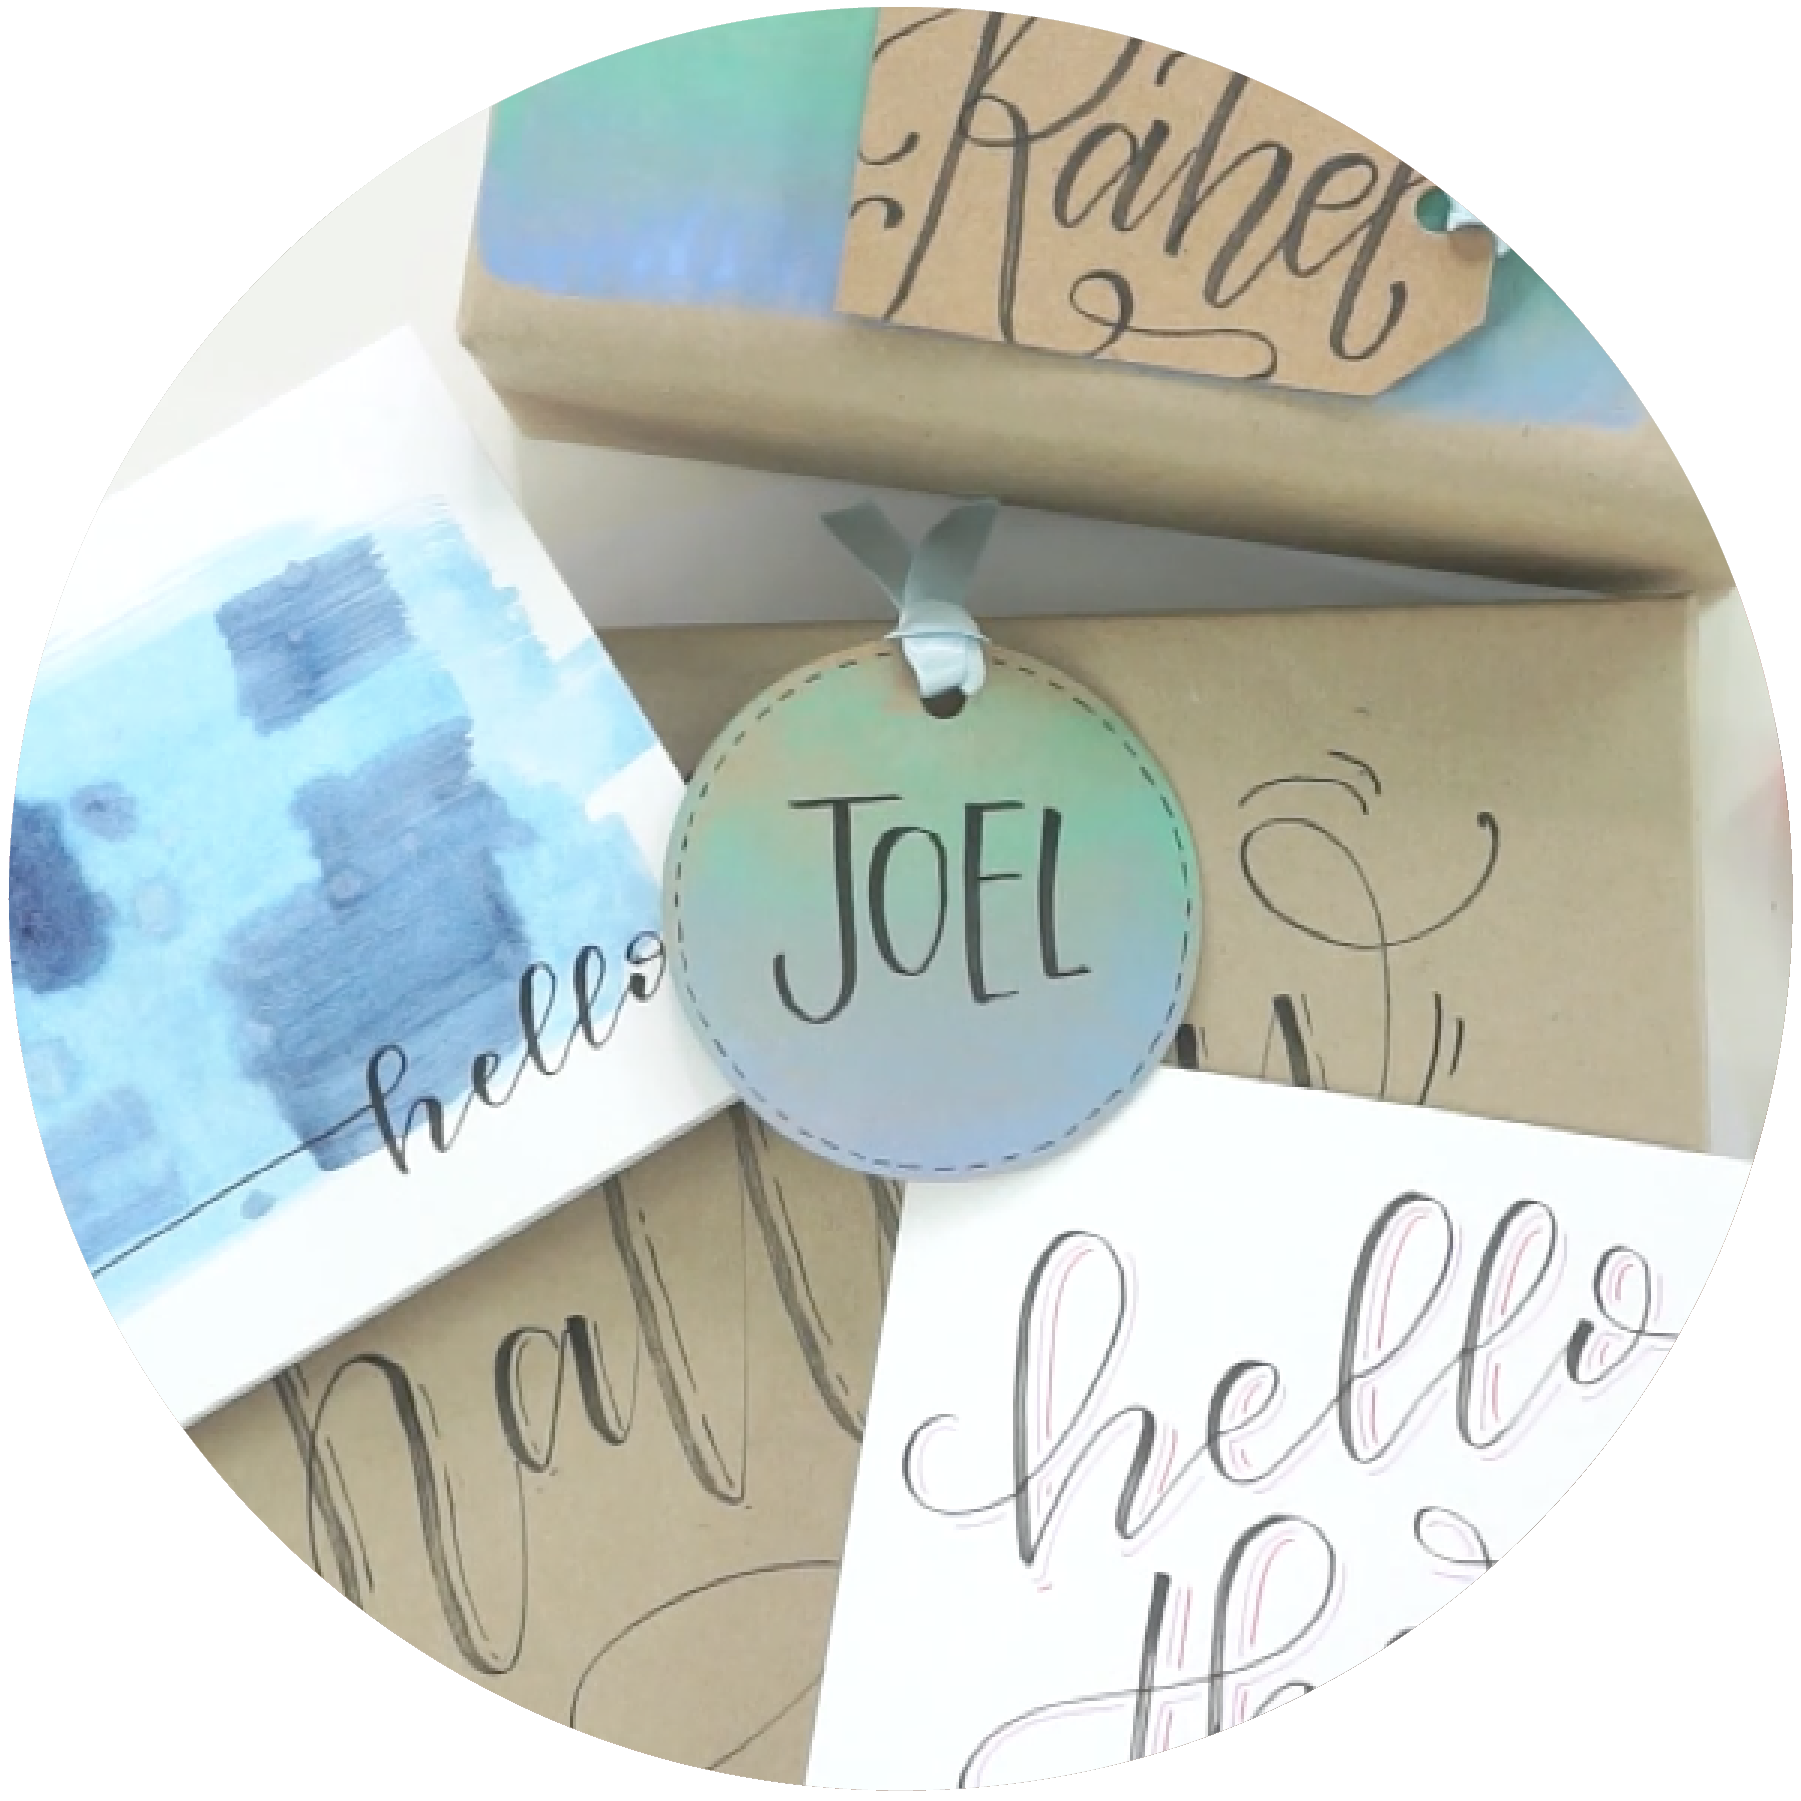 Learn how to hand letter and create your own hand lettered masterpieces with this online video course from Amanda Arneill at amandaarneill.com